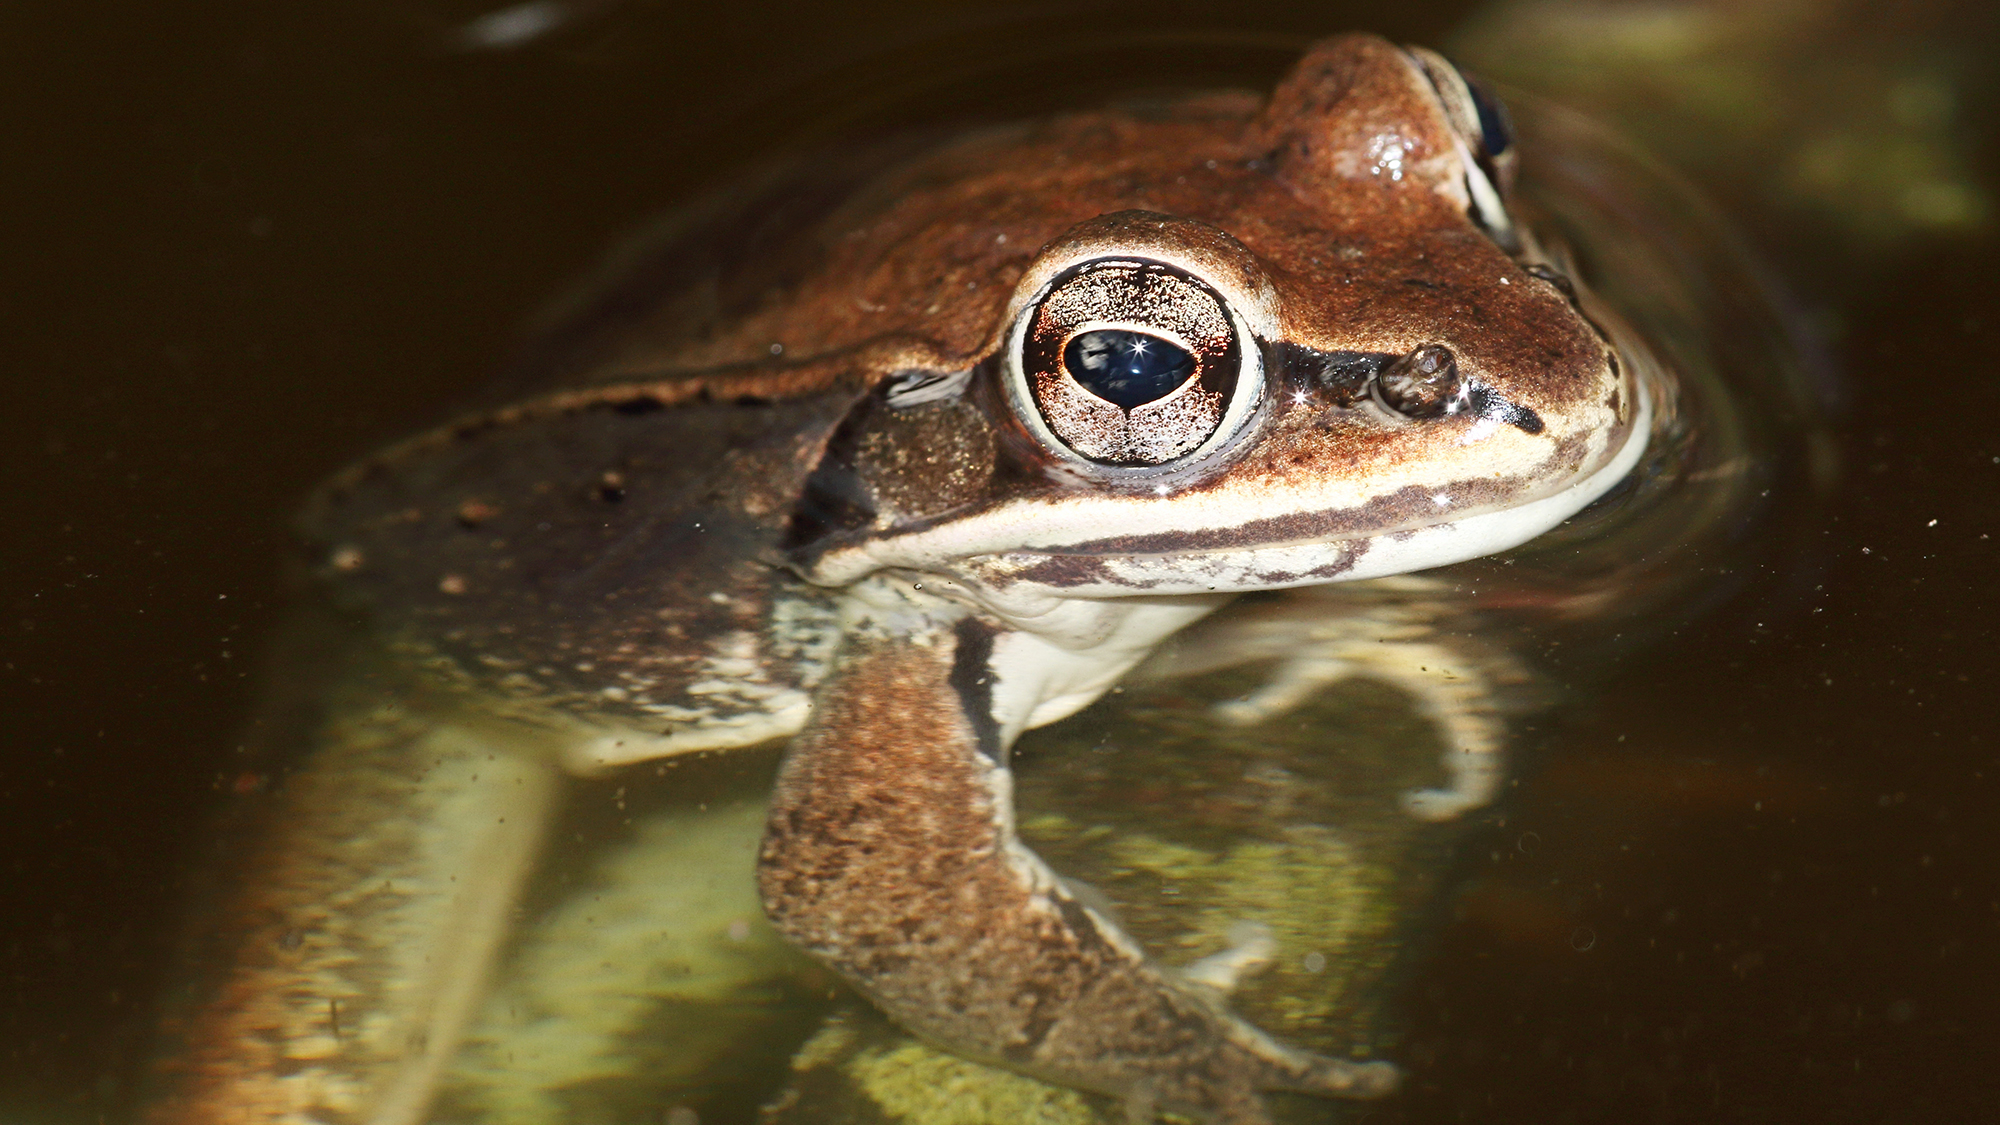 Wood frogs return to the same ponds and wetlands each year to lay eggs.